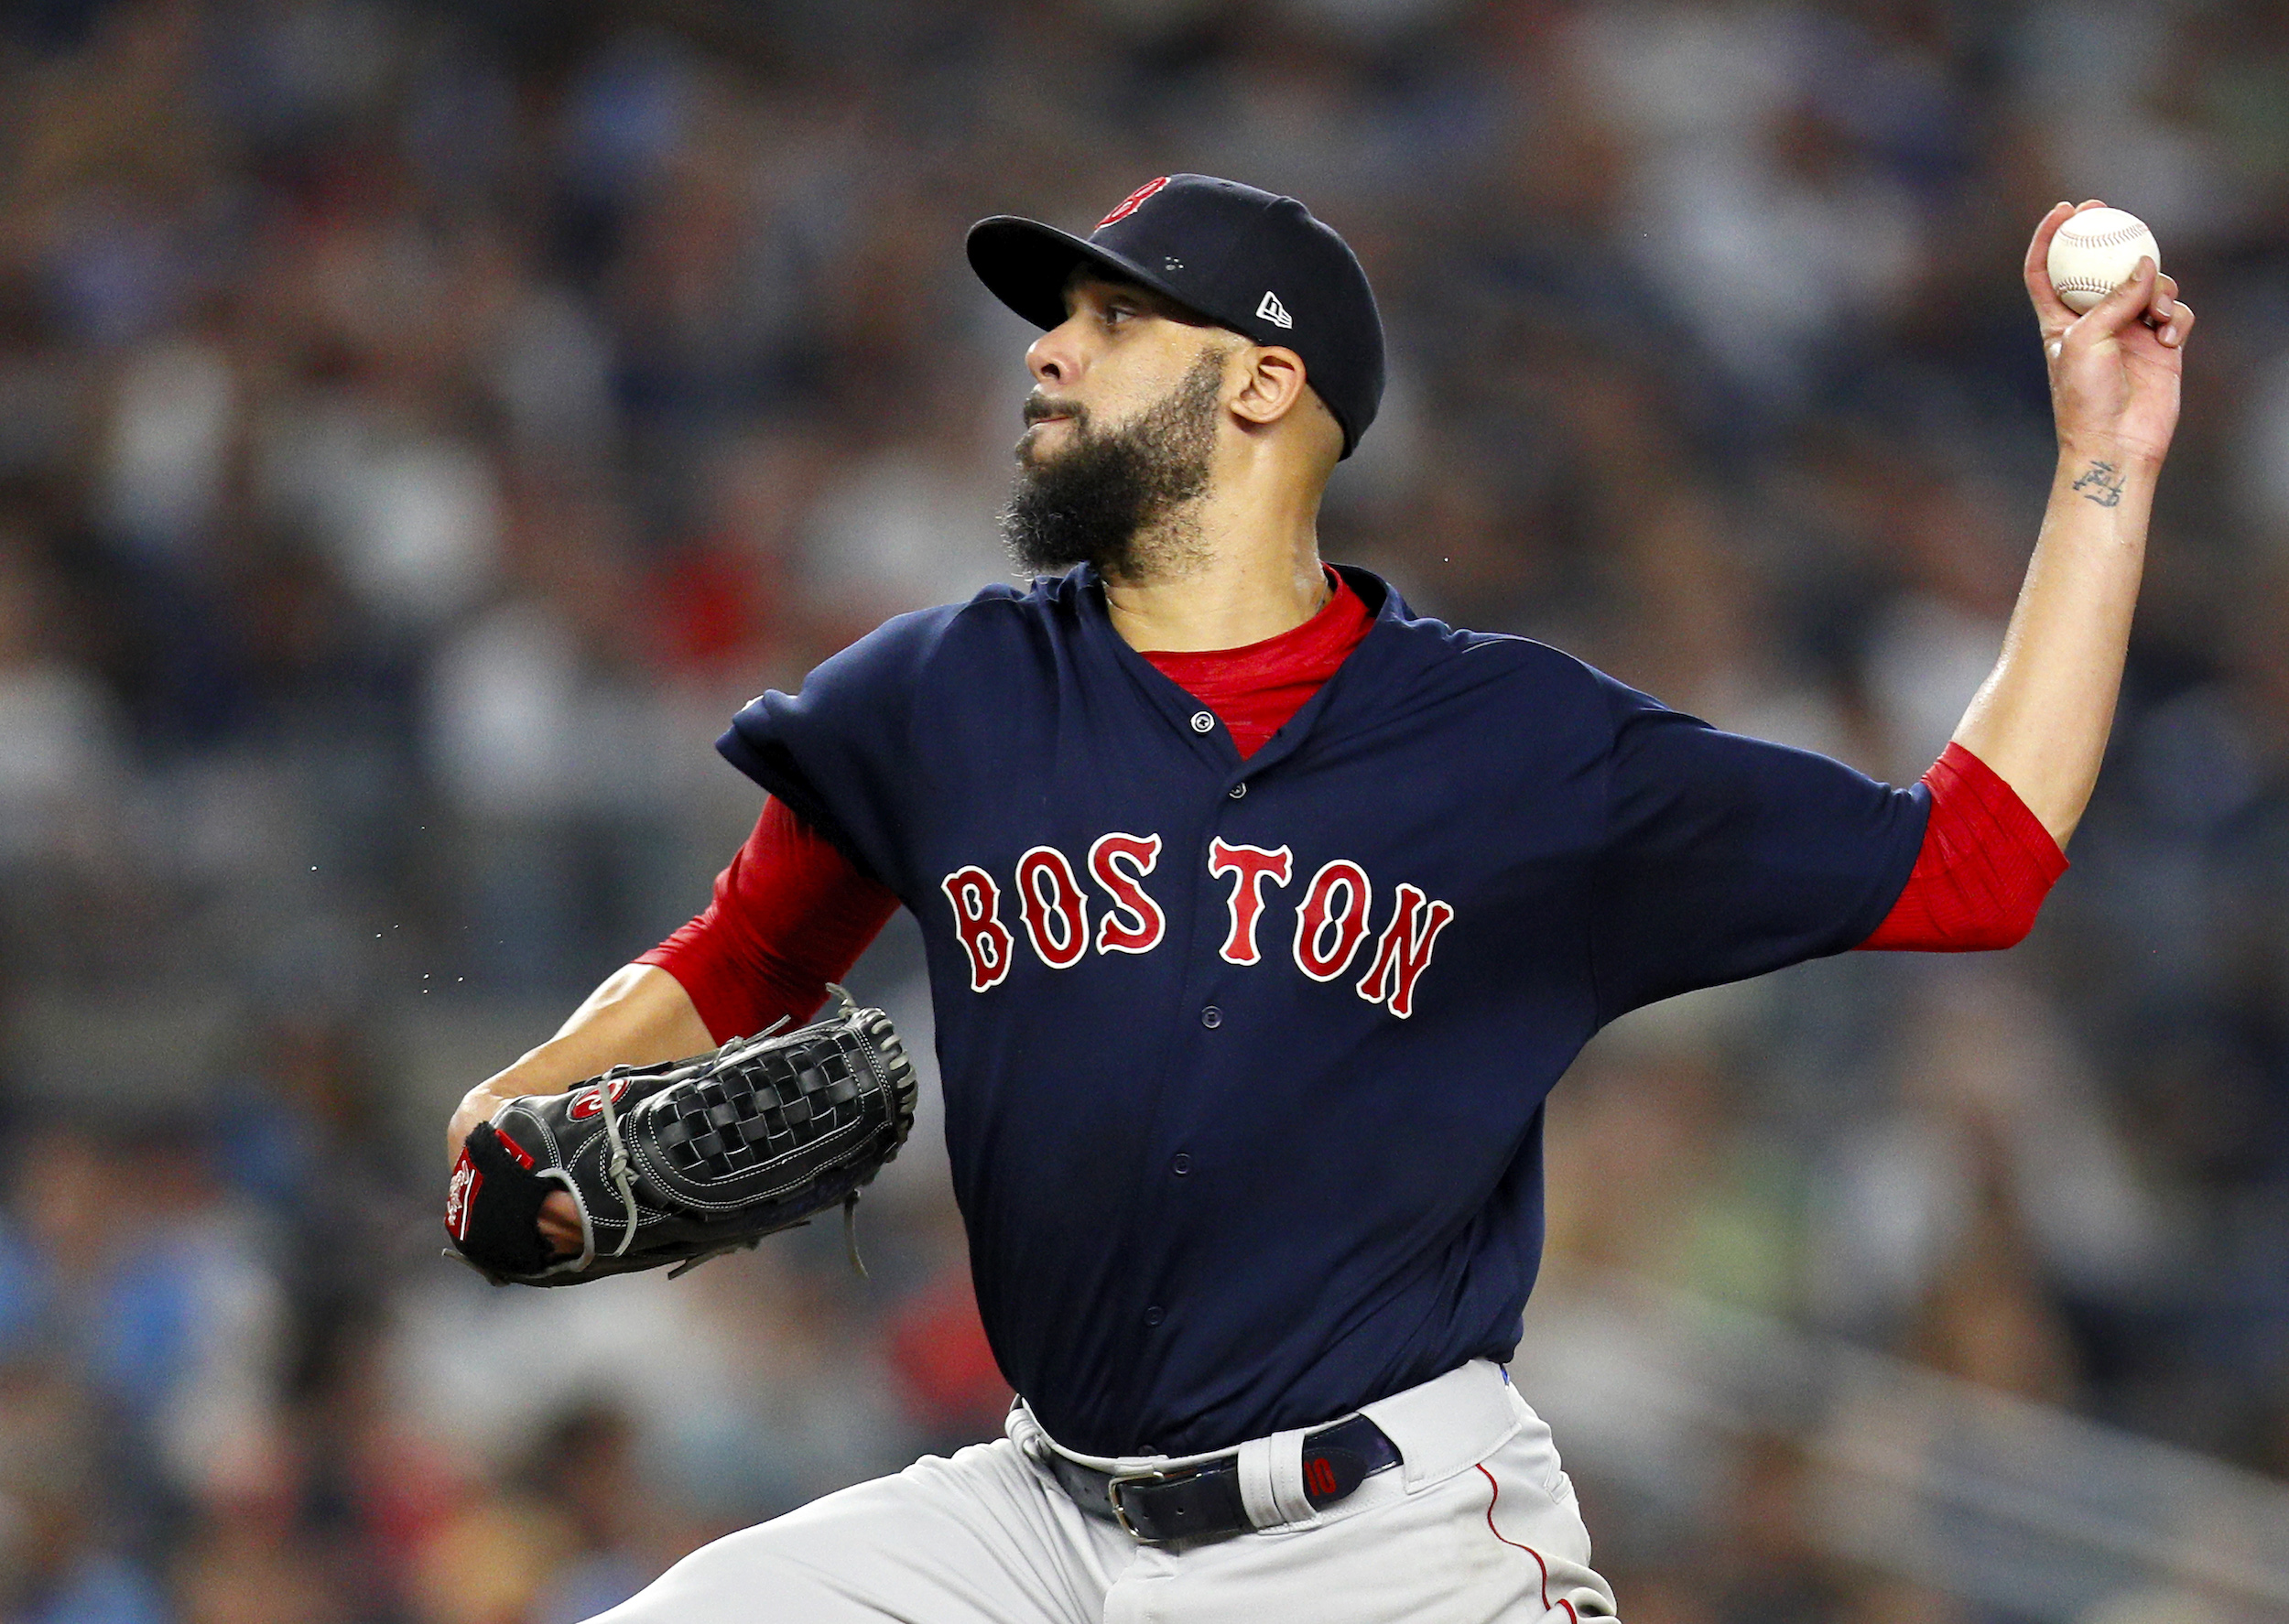 David Price Almost Quit Baseball and Got a Job at McDonald’s Before Making $184 Million in the Big Leagues